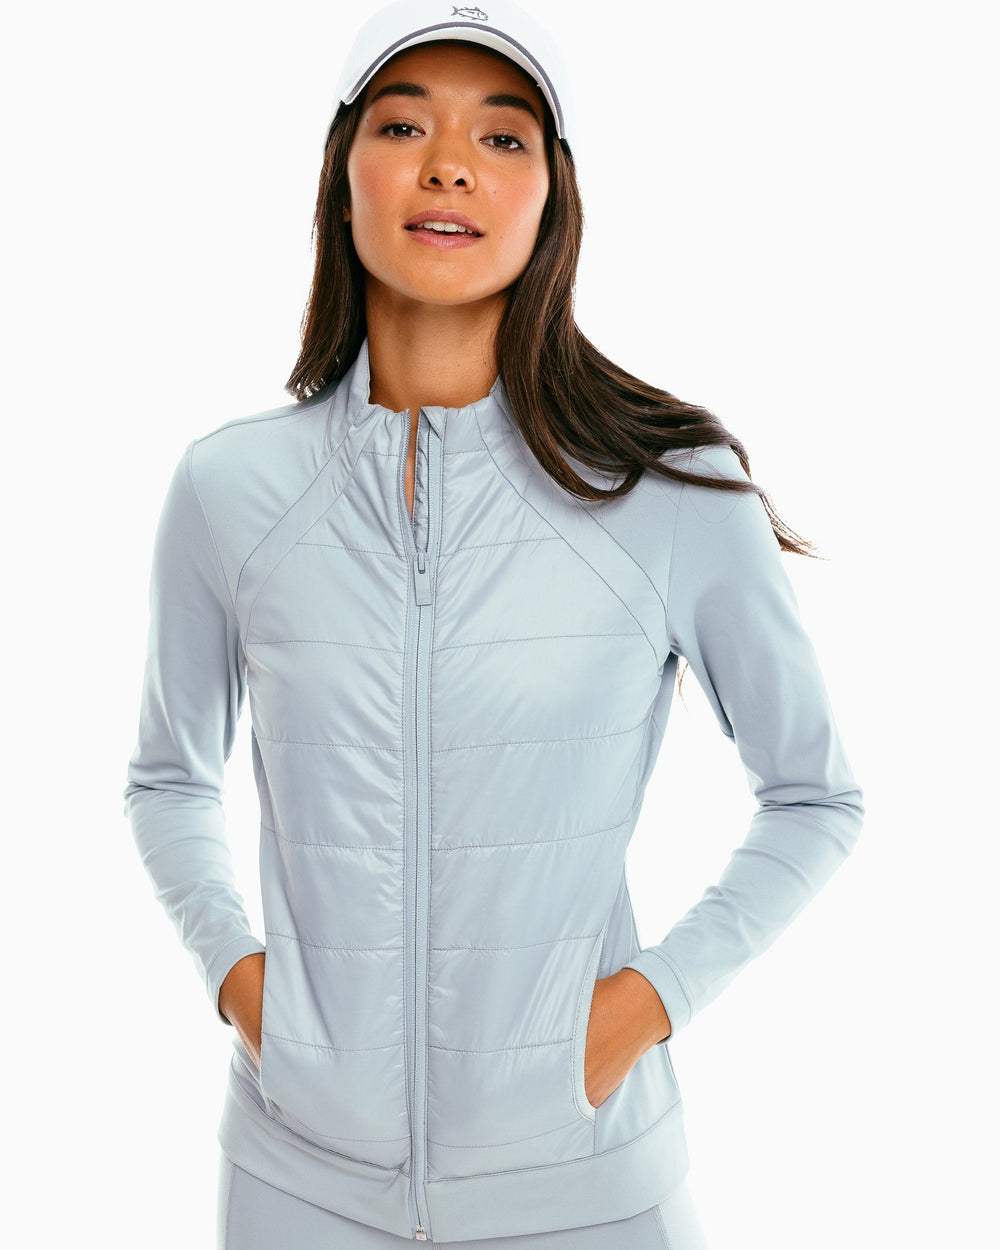 The front of the Women's Josette Mixed Media Full Zip Athletic Jacket by Southern Tide - Light Grey